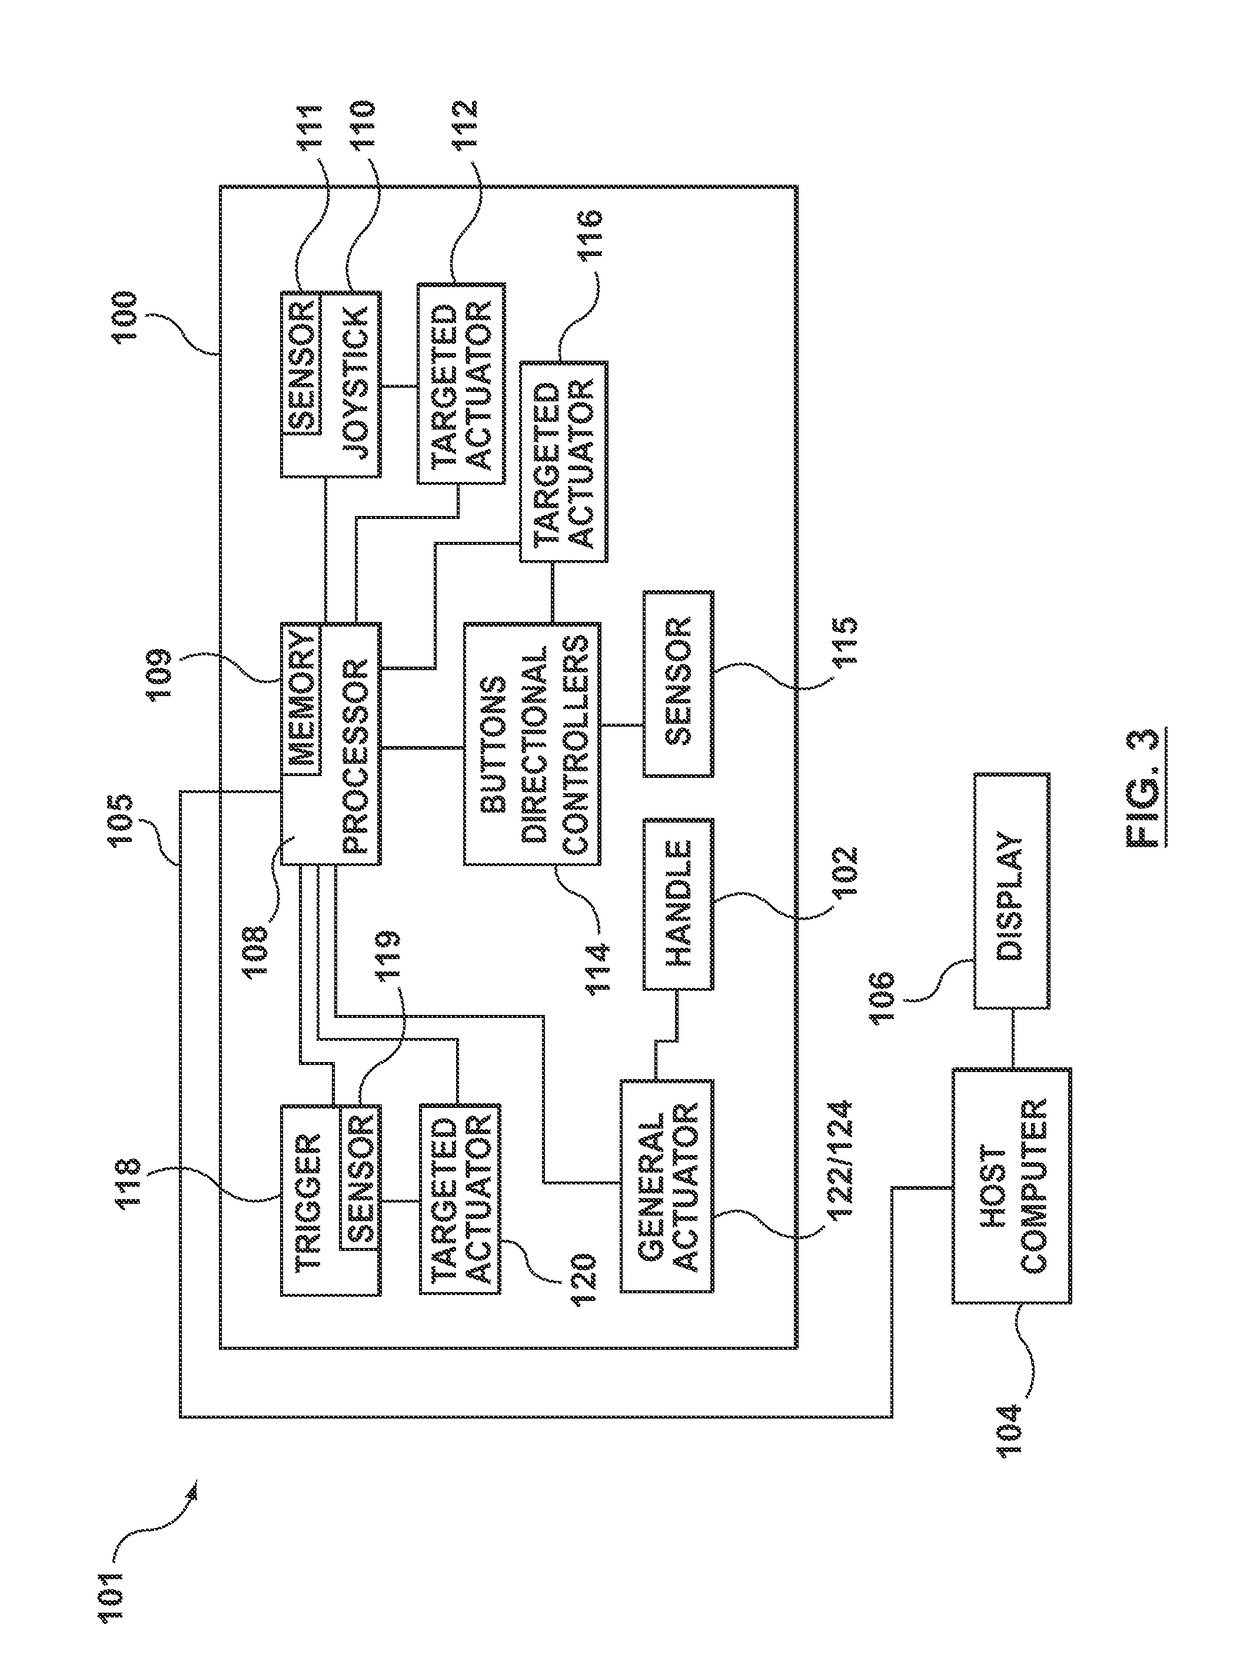 Gaming device having a haptic-enabled trigger